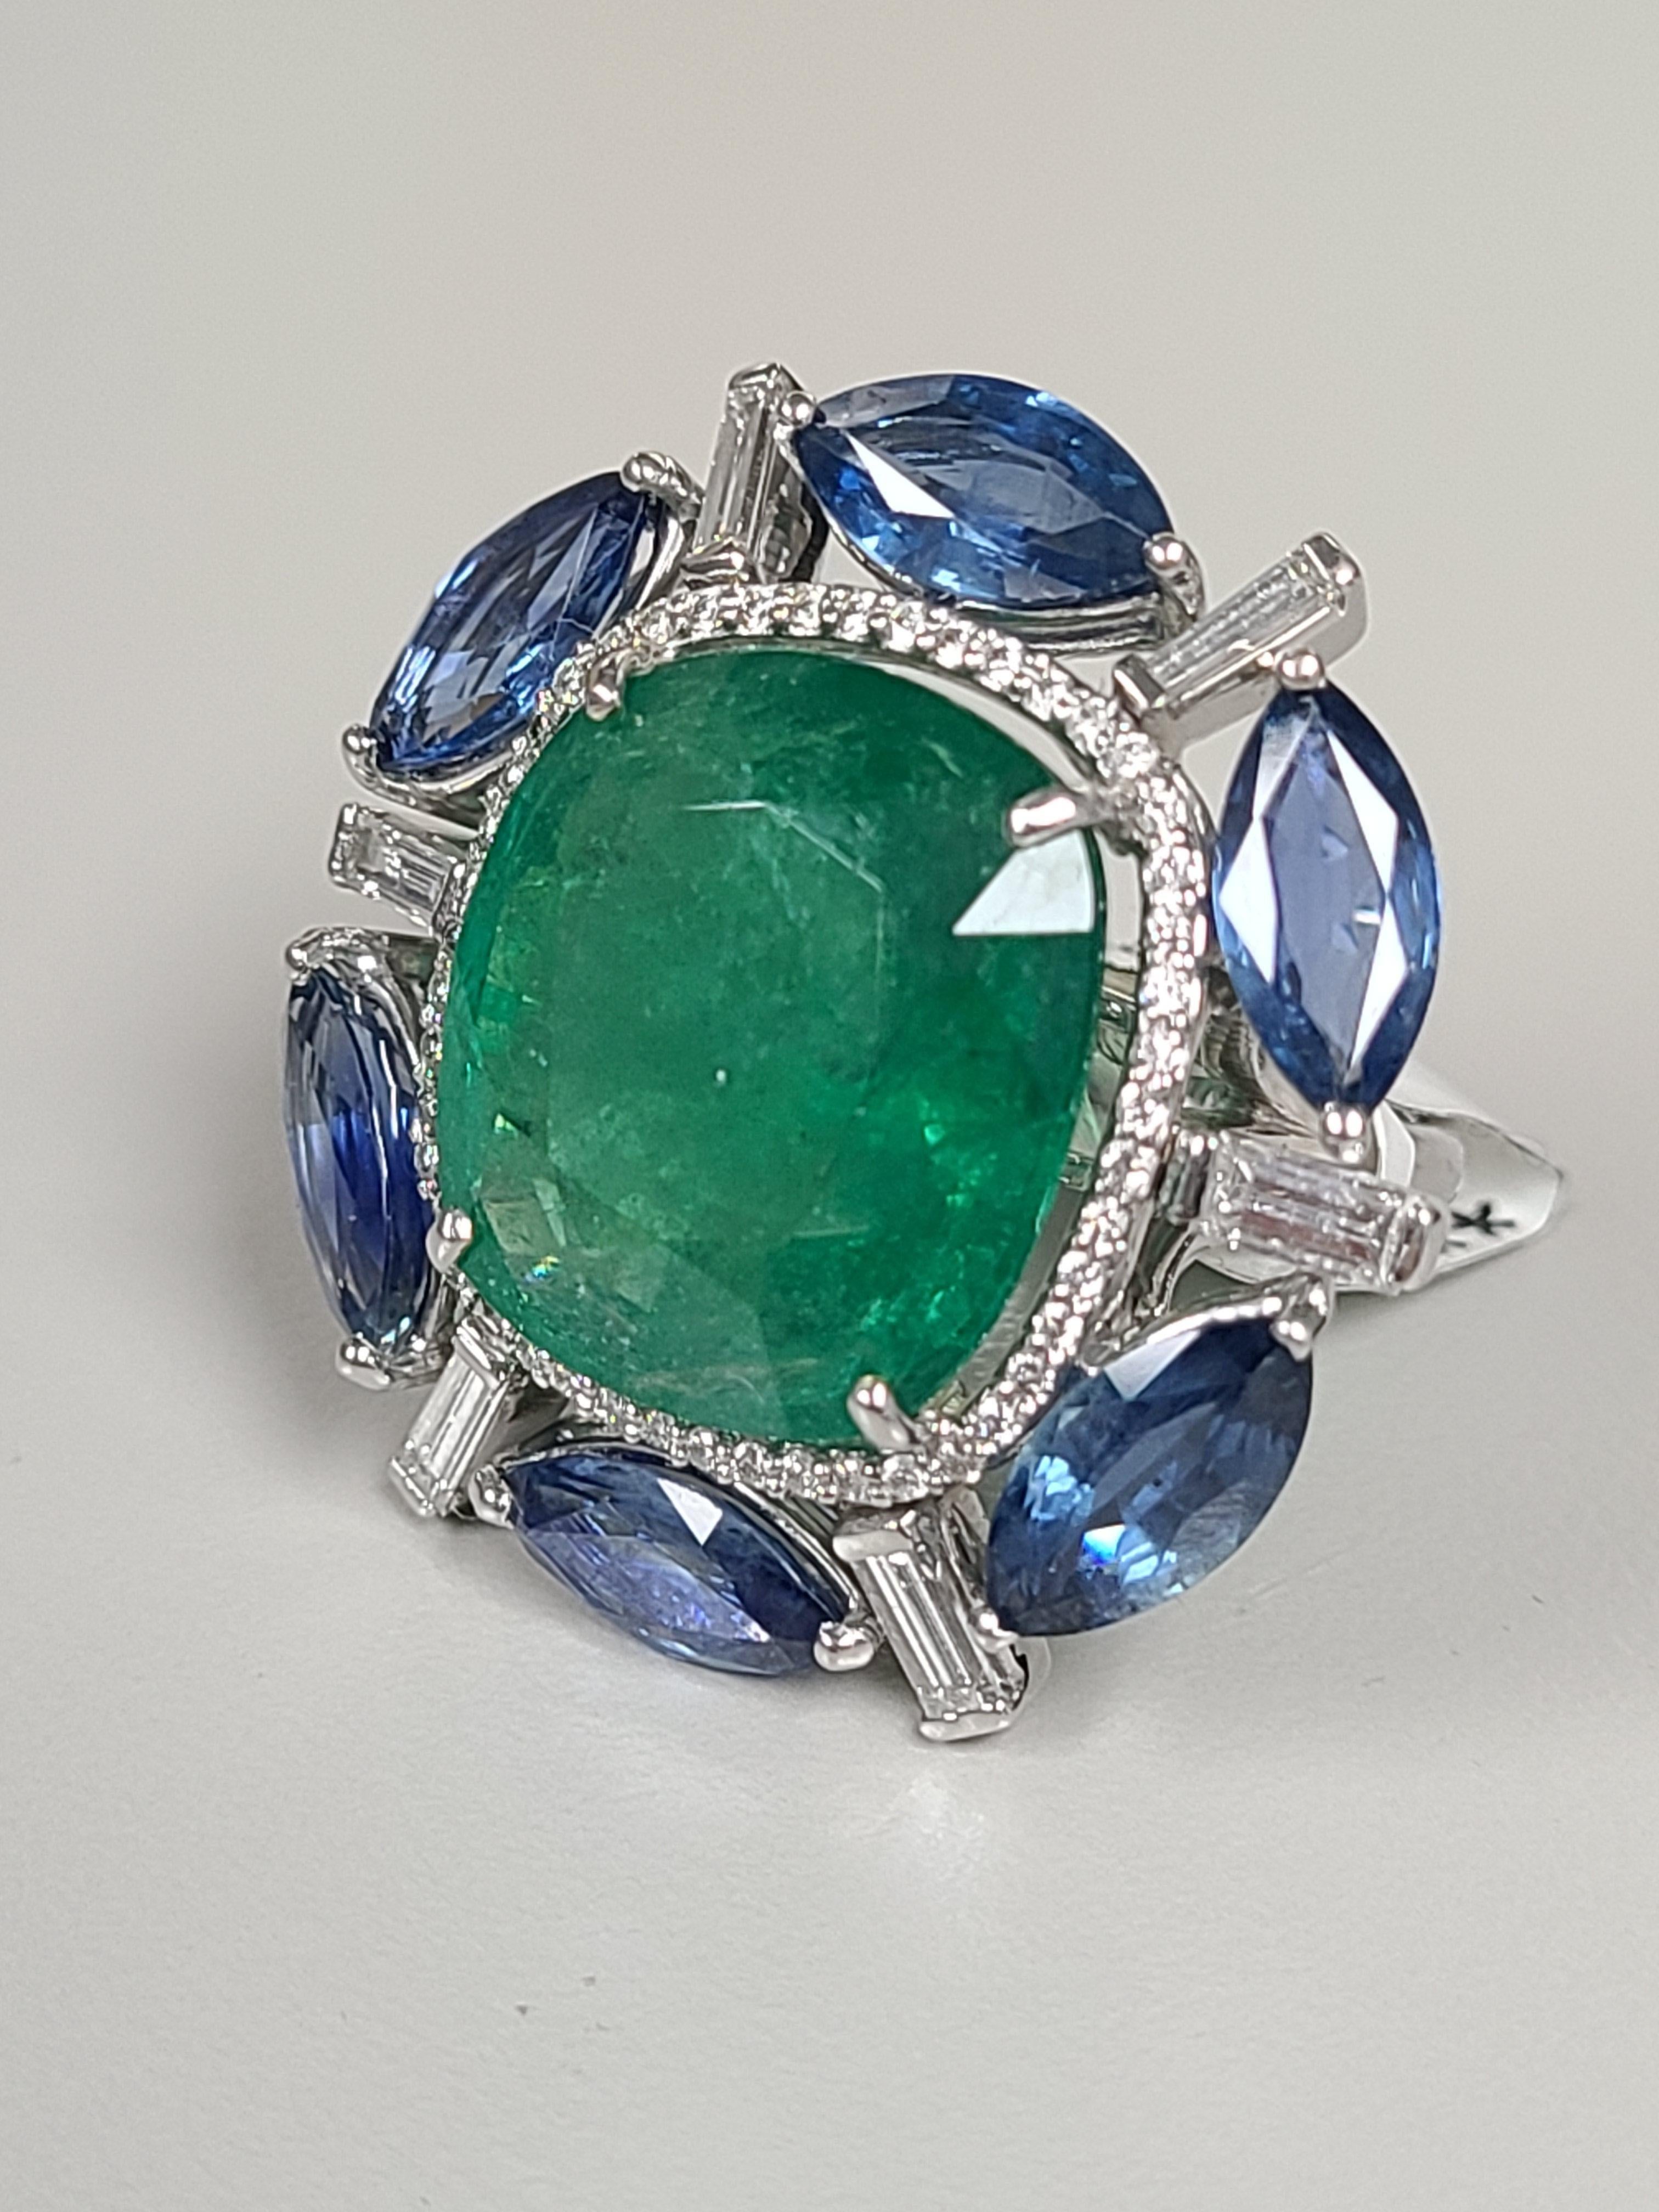 A gorgeous Zambian Emerald & Ceylon Blue Sapphire cocktail ring set in 18K Gold and Diamonds. The Emerald is completely natural, without any treatment, and originates from Zambia. The weight of the Emerald is 14.54 carats. The weight of the Blue